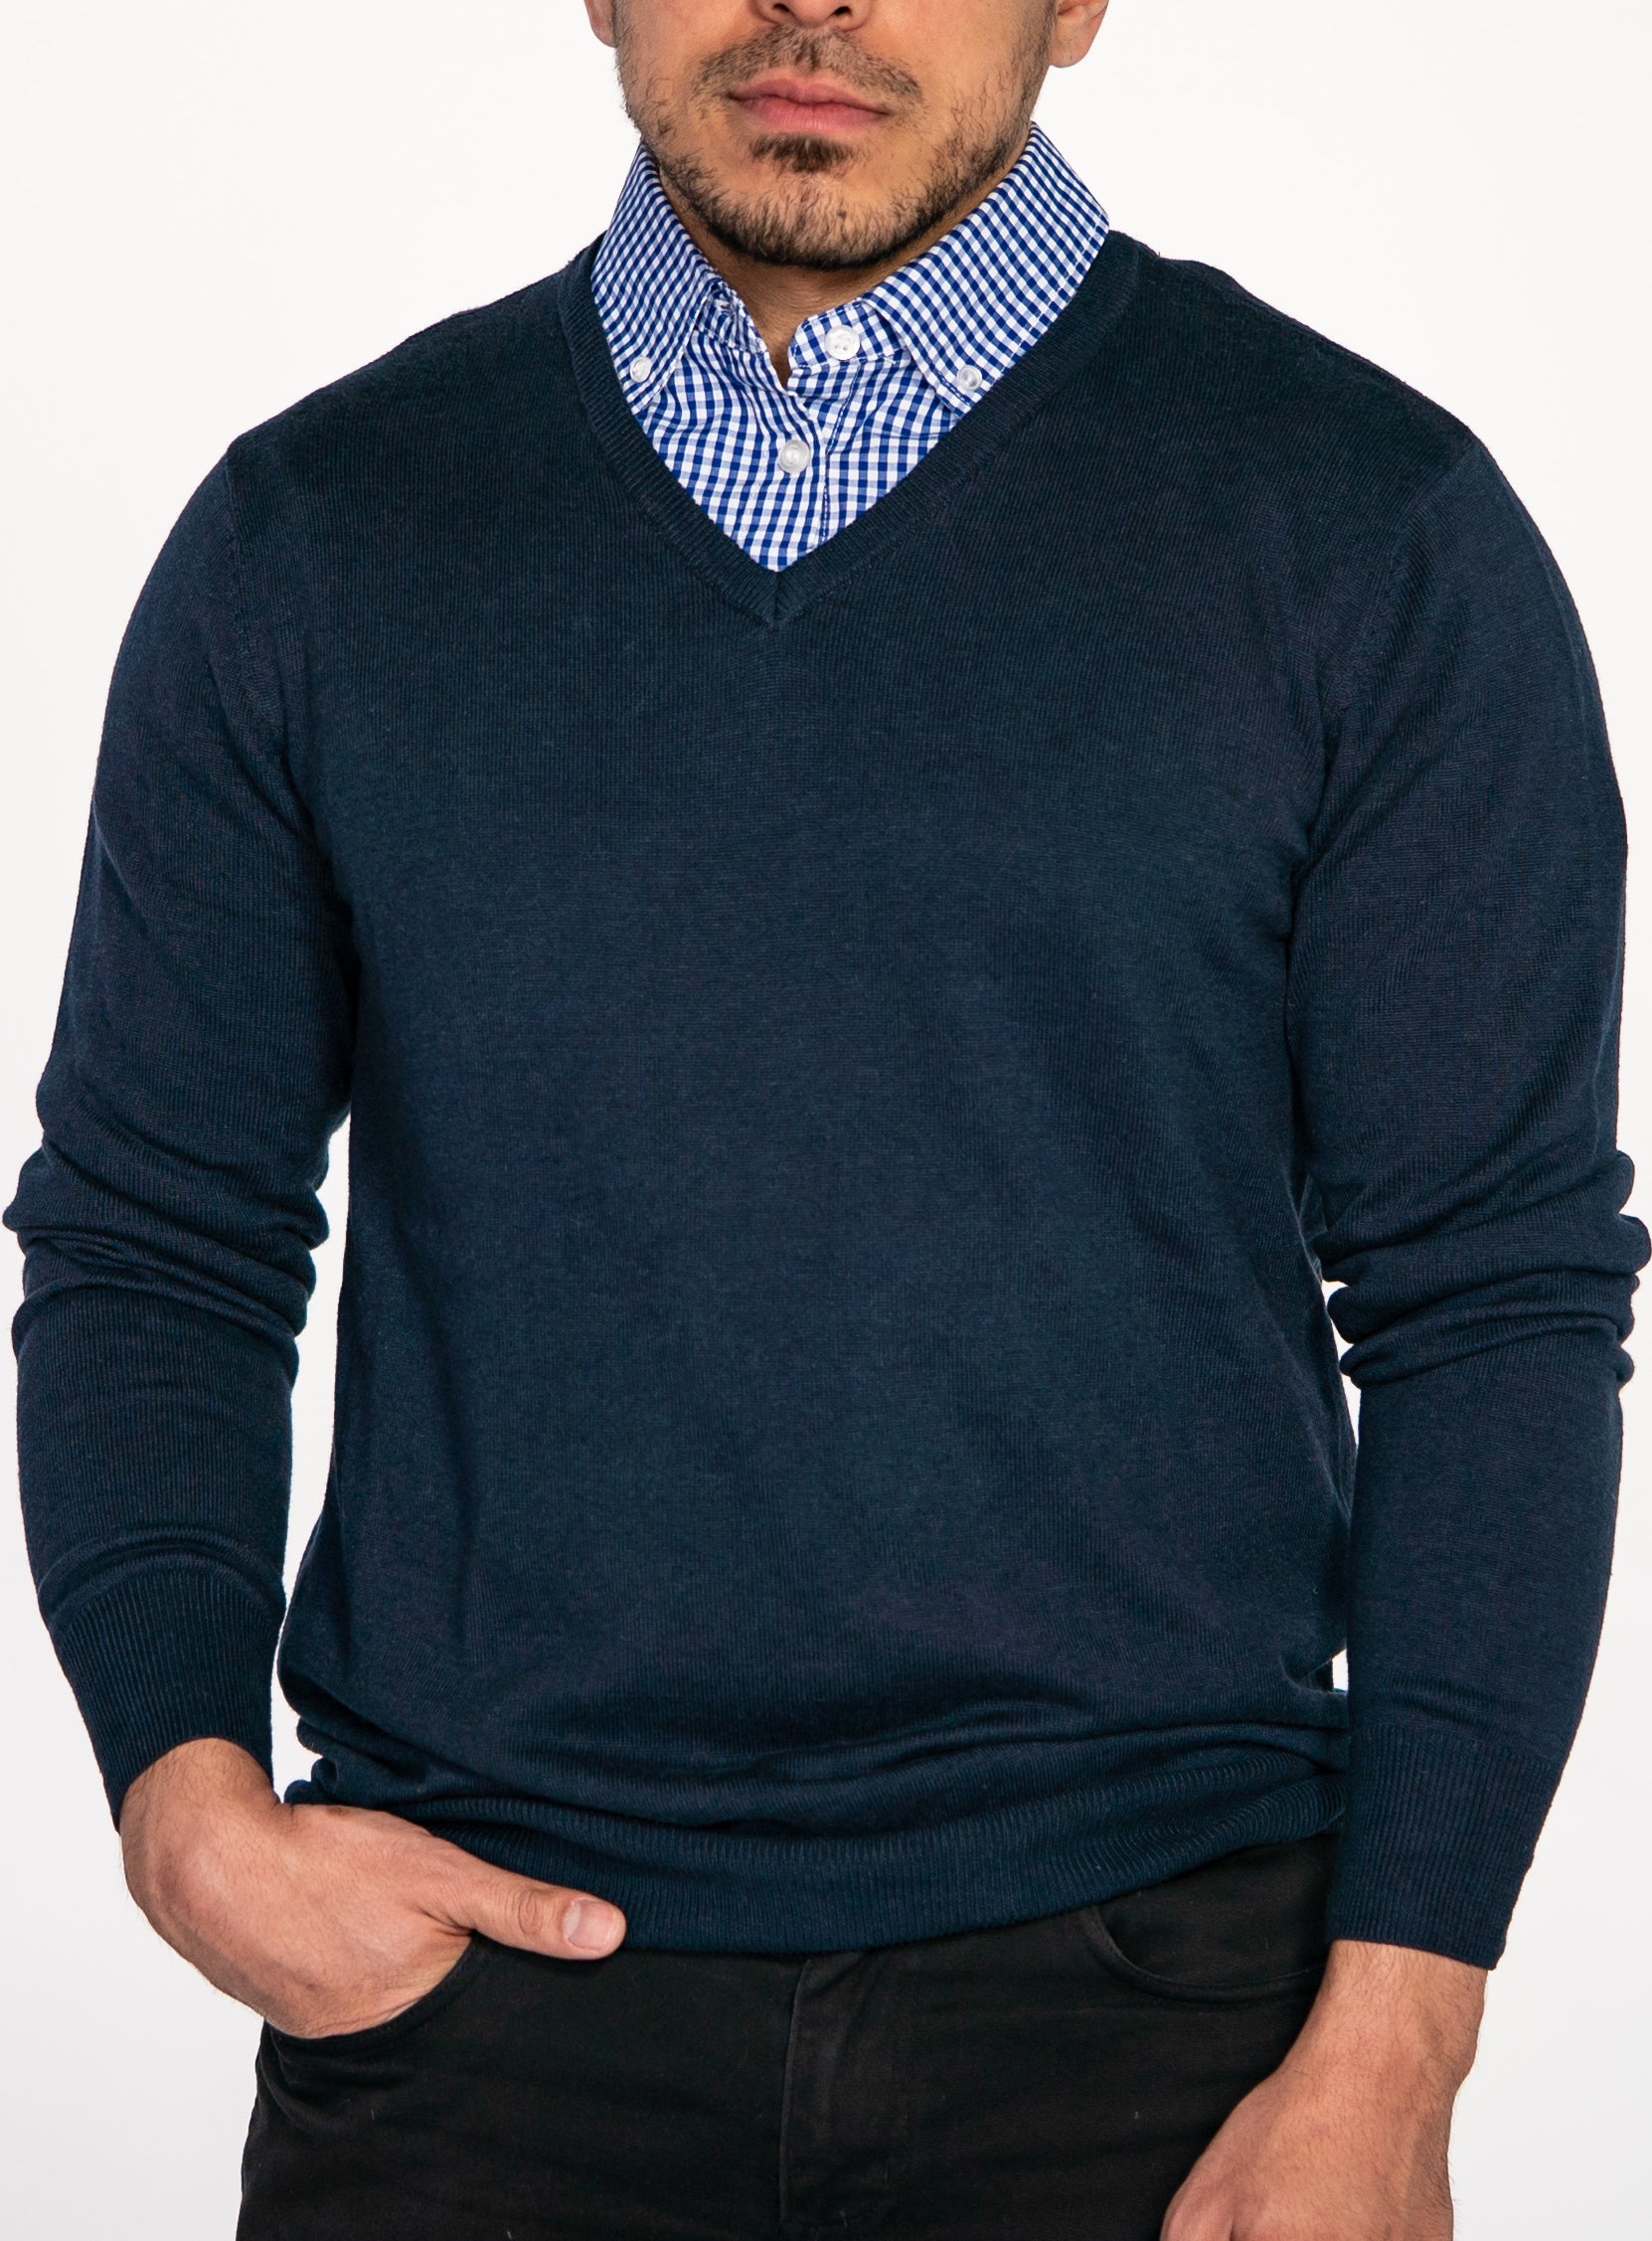 Navy Blue Sweater with Blue Gingham Collared Shirt